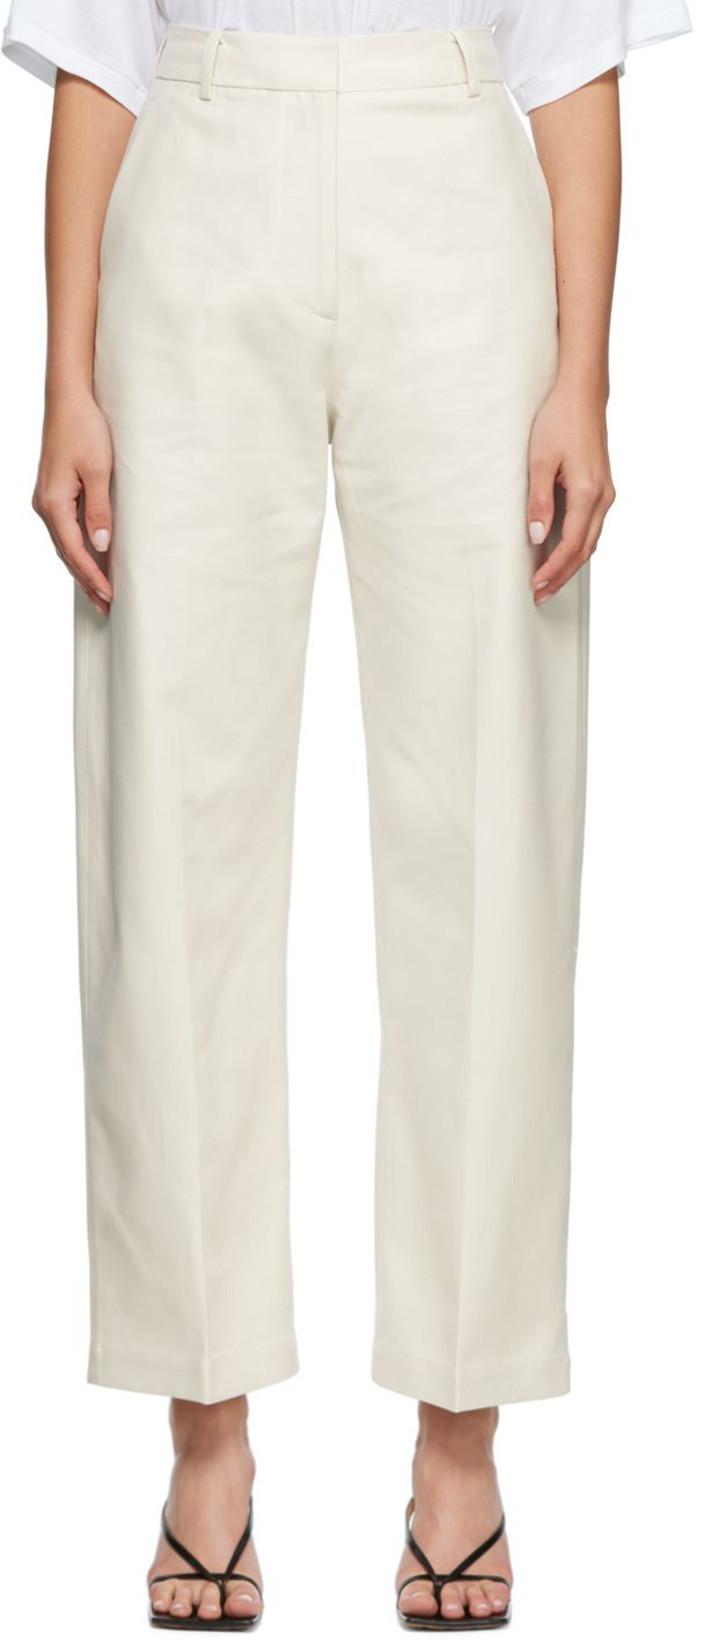 Off-White High Waist Trousers by ARCH THE